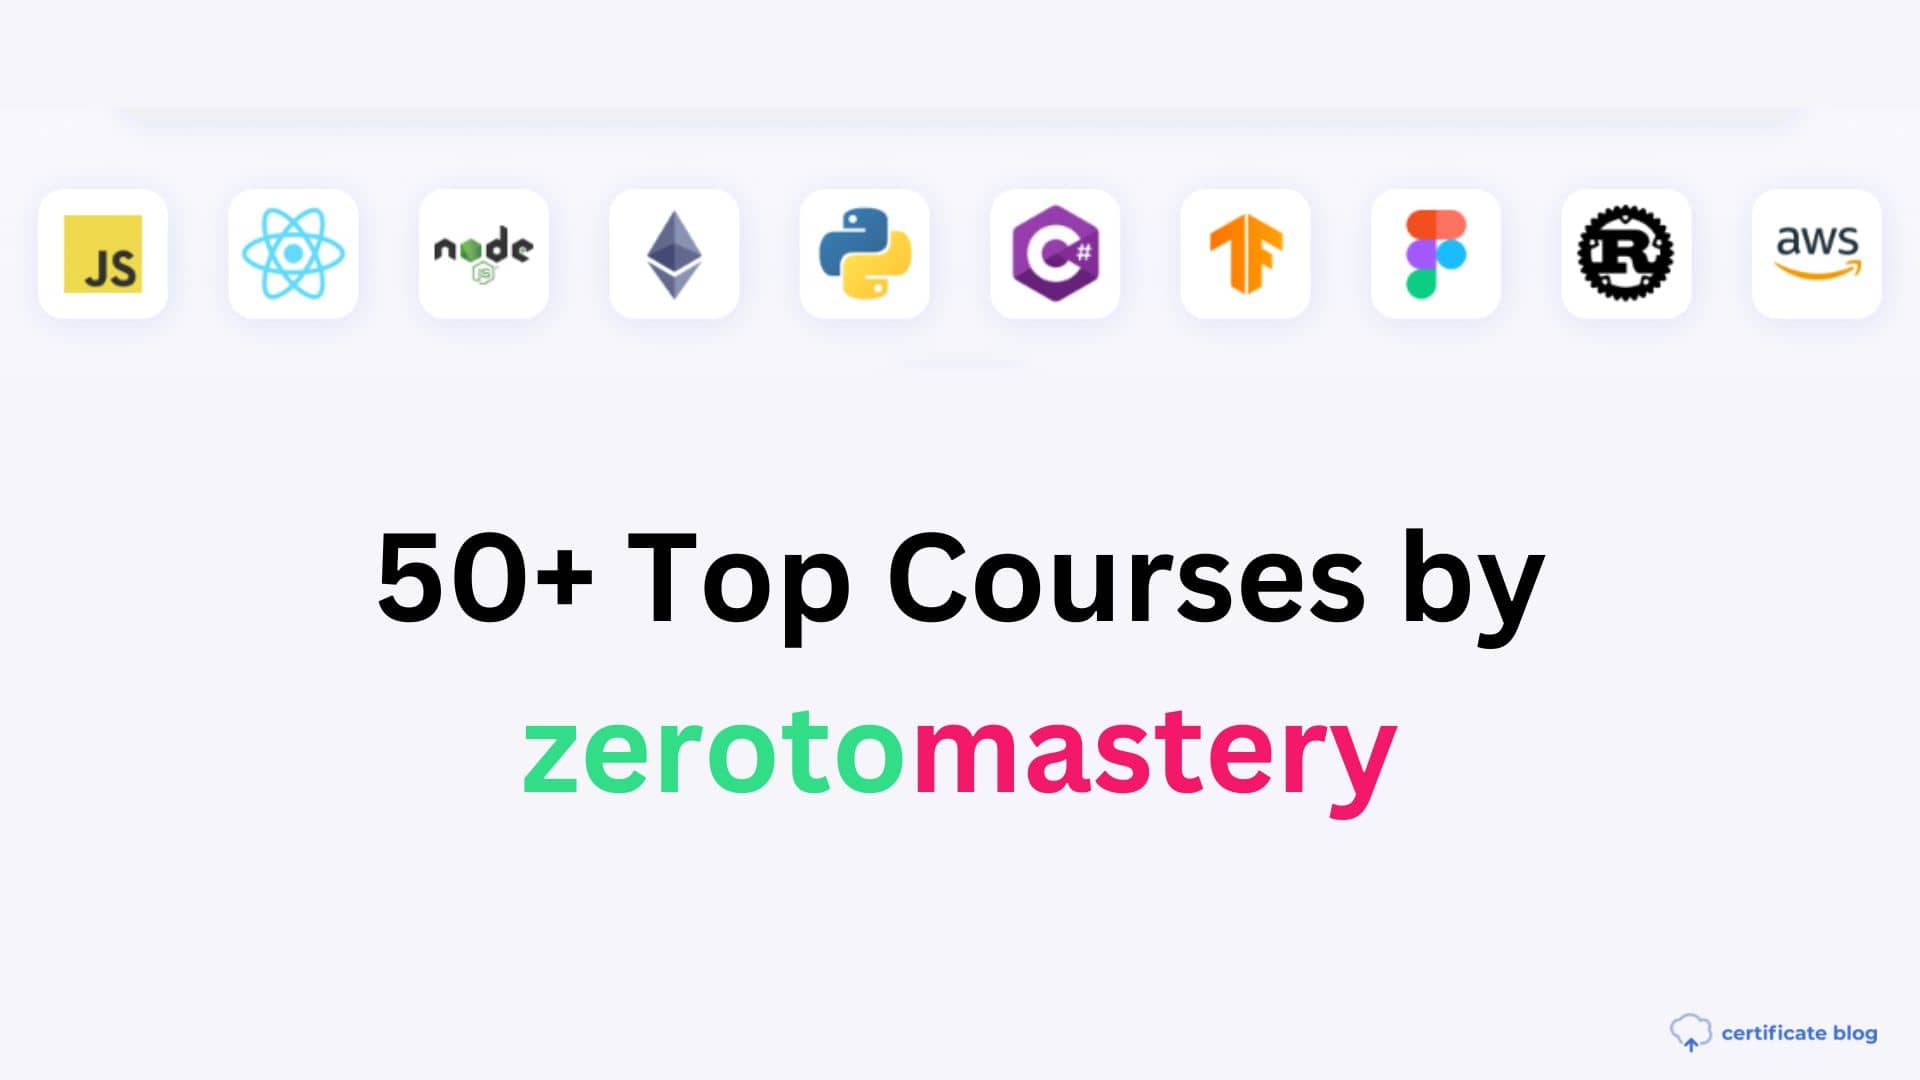 New 50+ Top Courses by zerotomastery in 2023